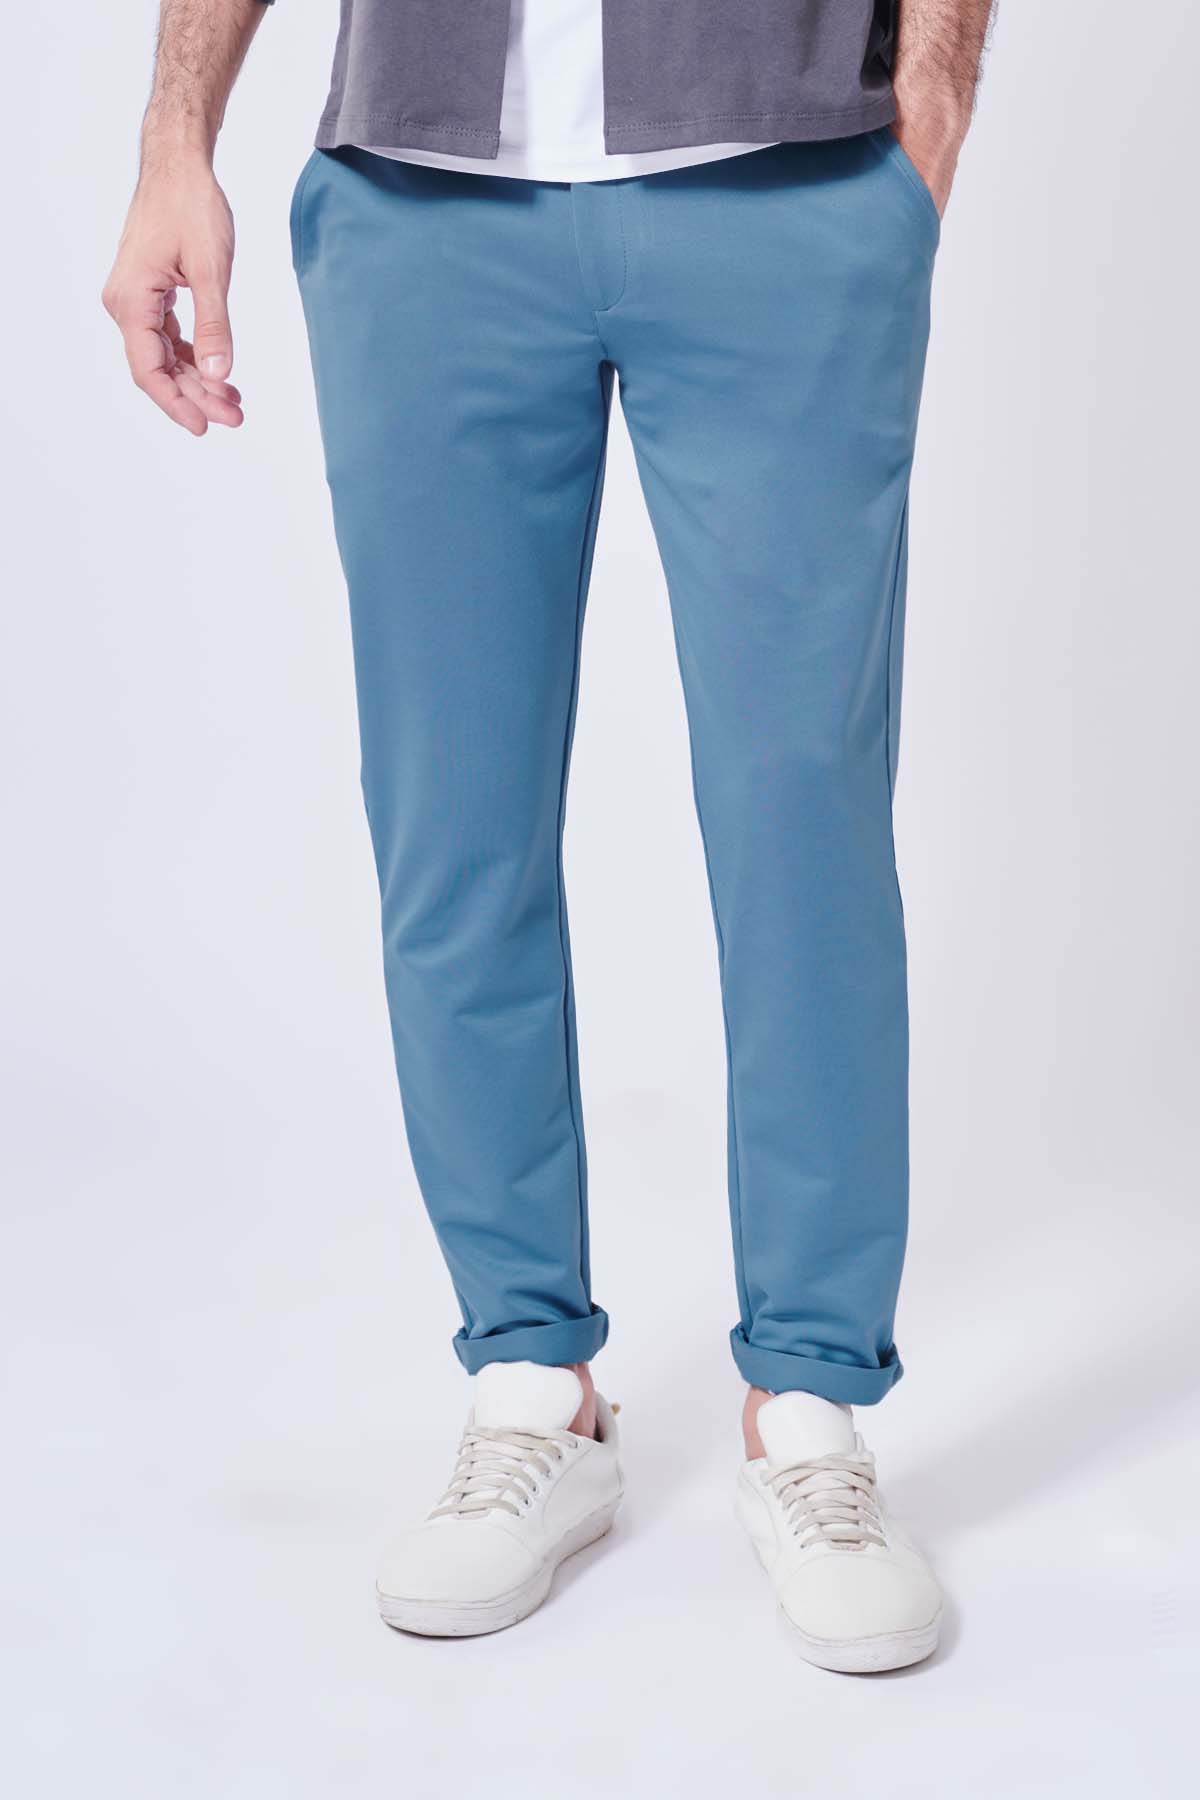 The Bluefin Pant Beyours